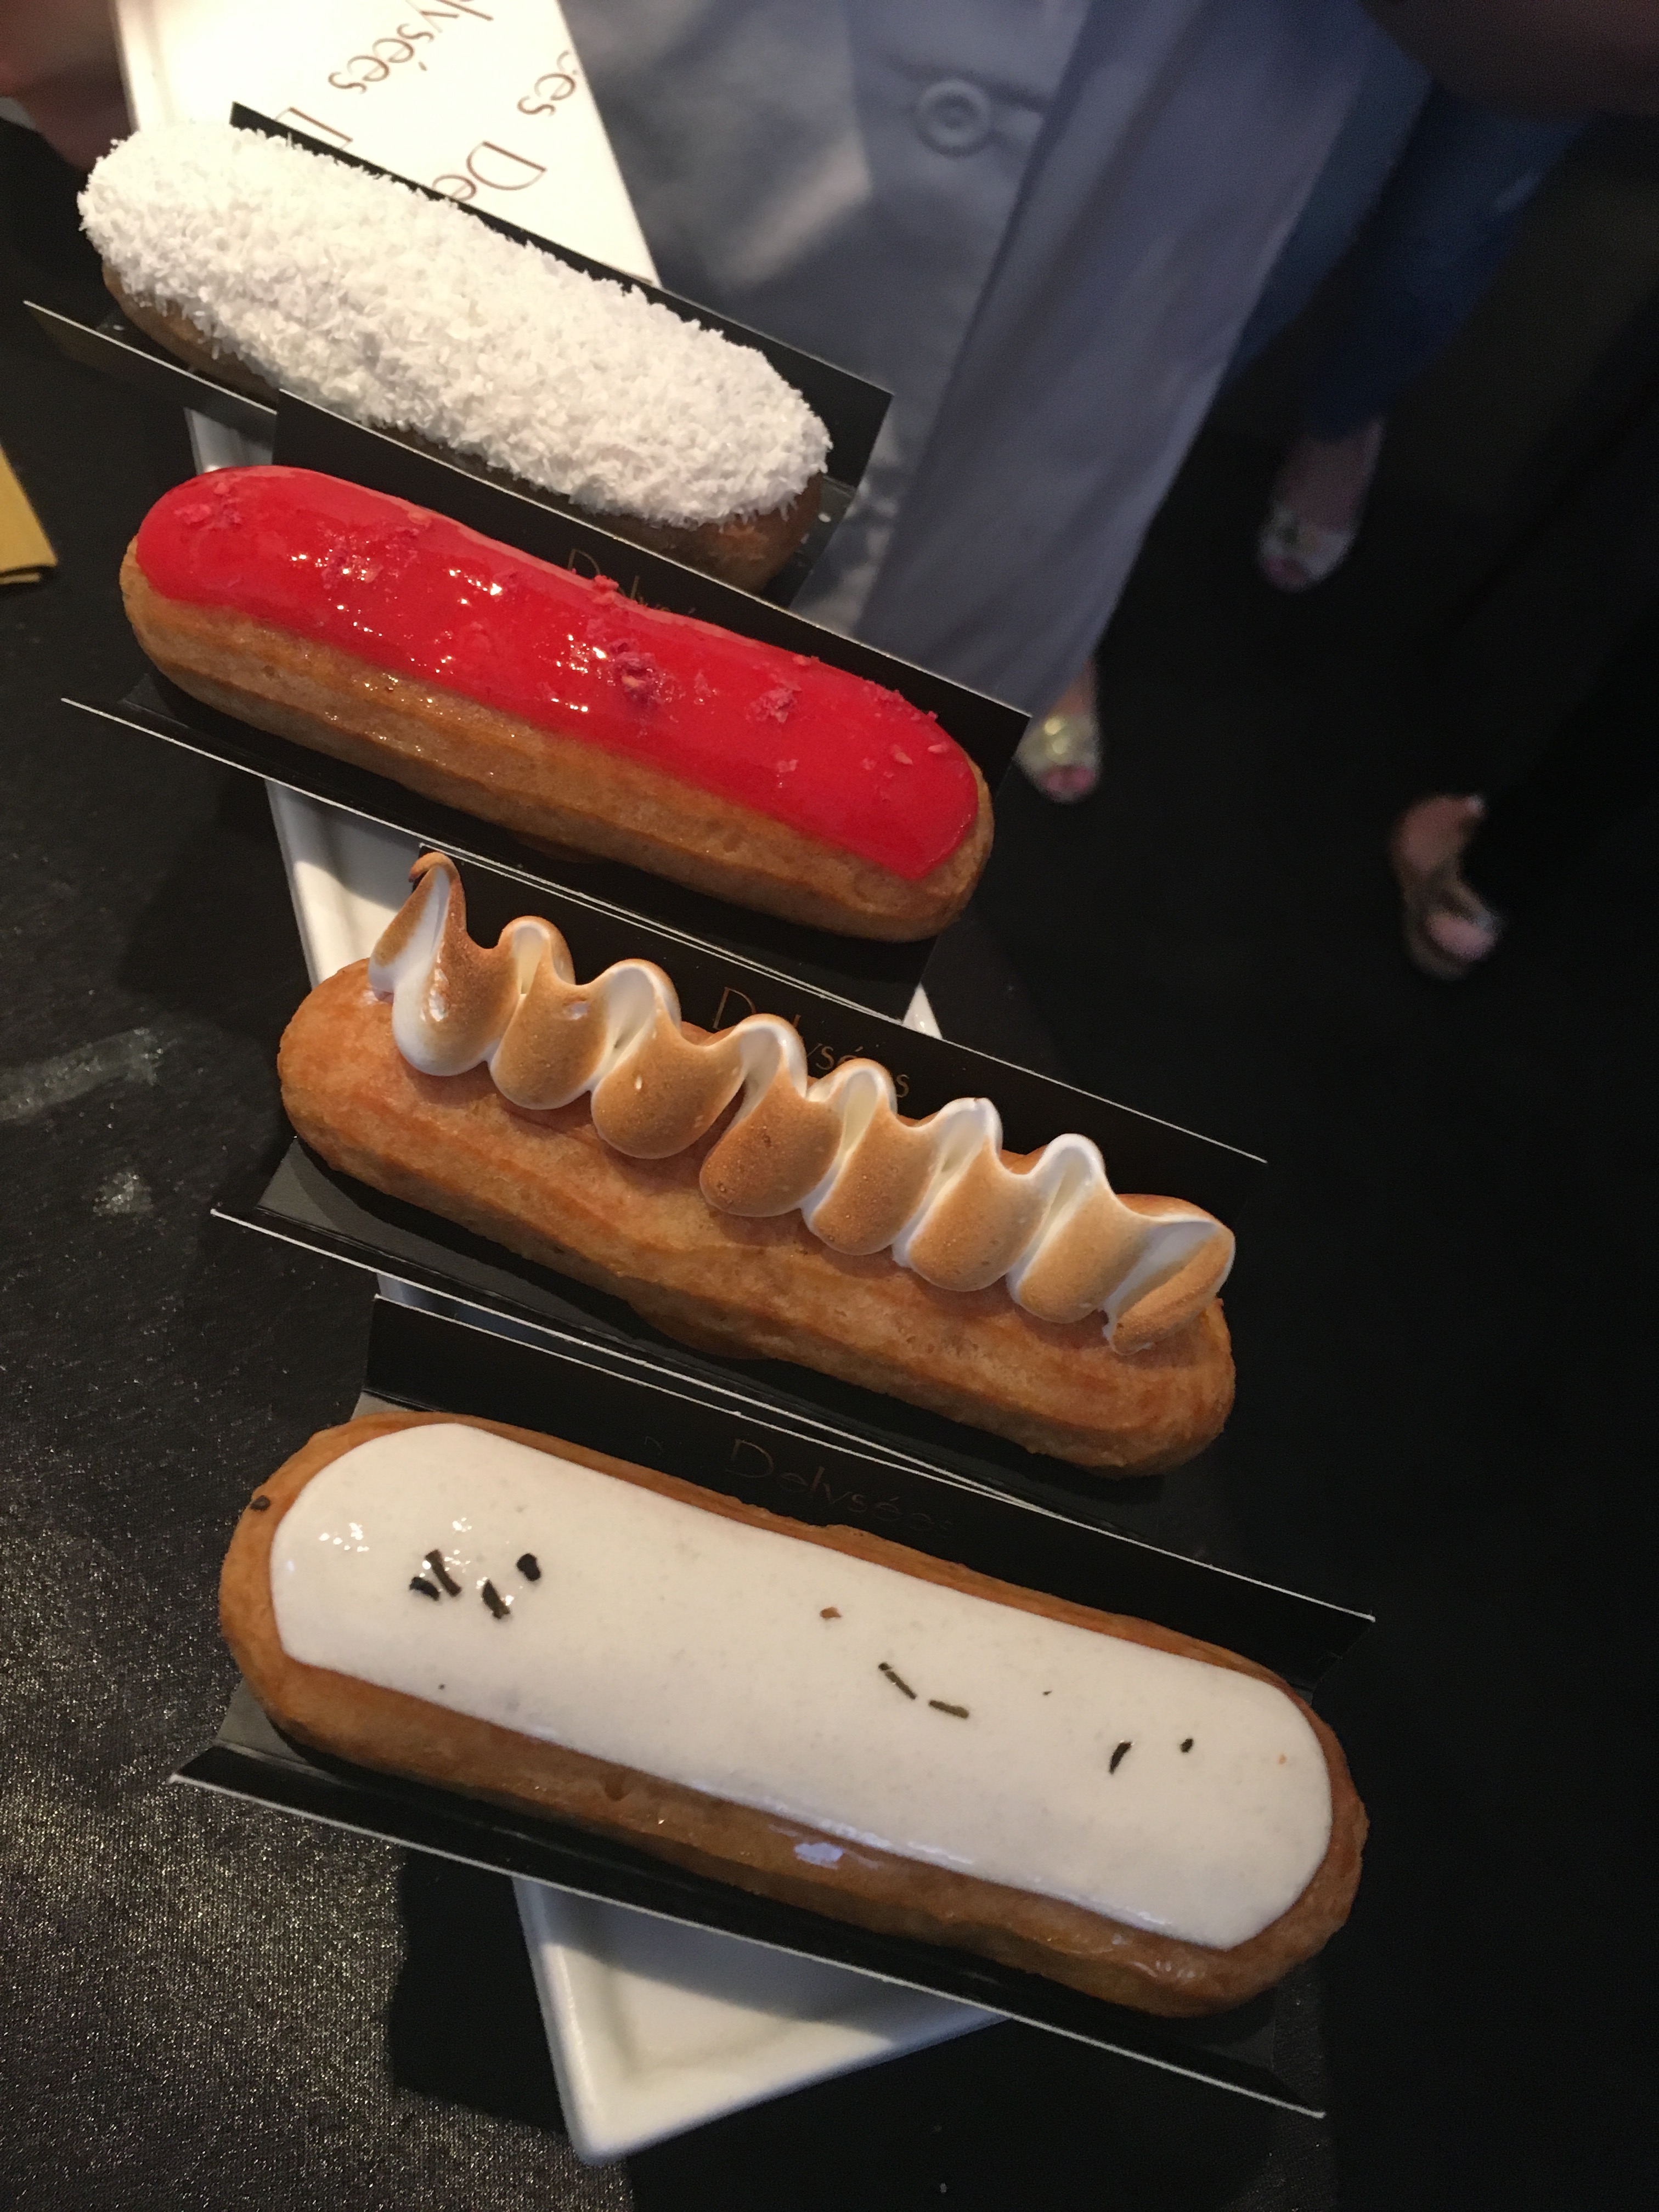 eclair at macaron at blueberry cheesecake at summer rendezvous at dj at delysee french pastries